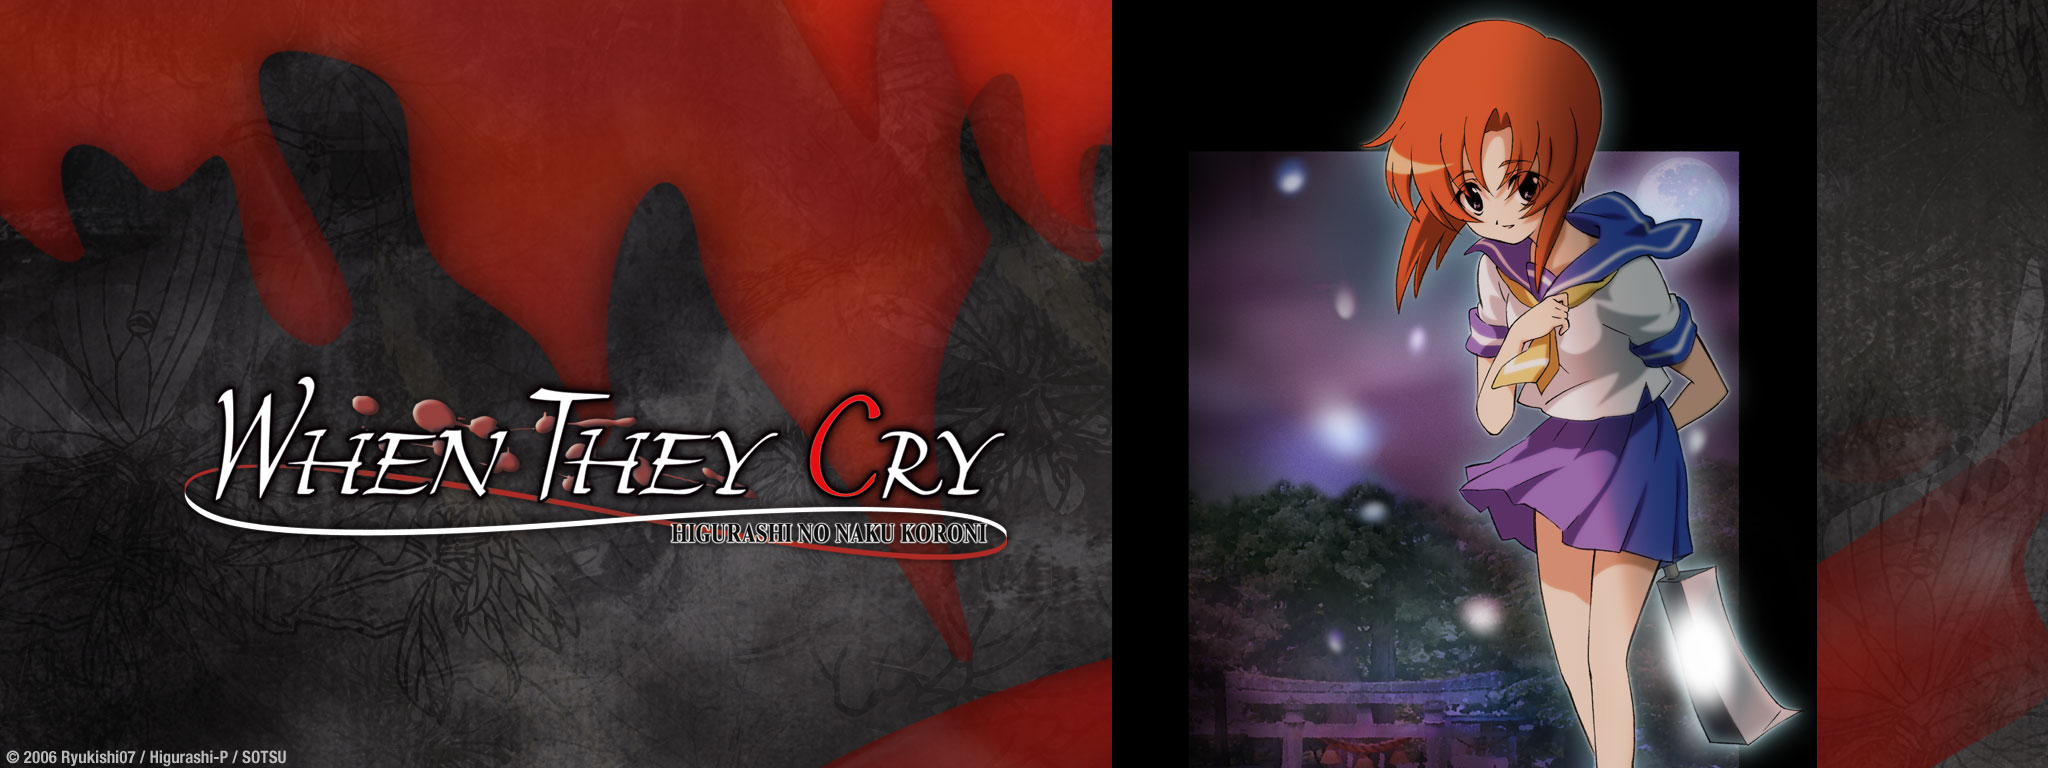 Title Art for When They Cry